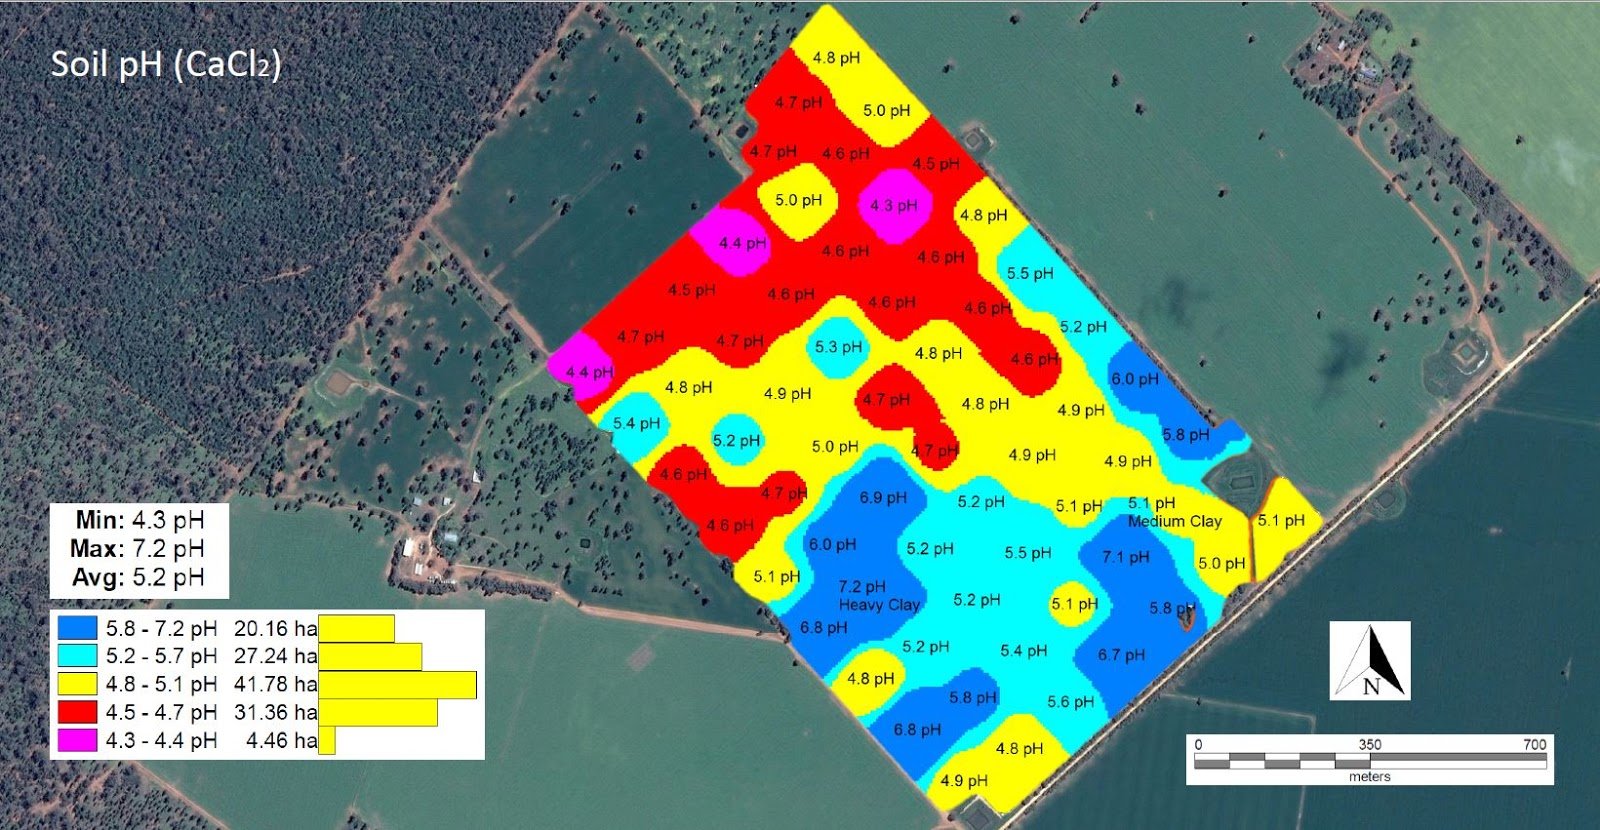 Ariel image of paddocks with overlaid colour coded map showing variability of soil pH over the mapped area.